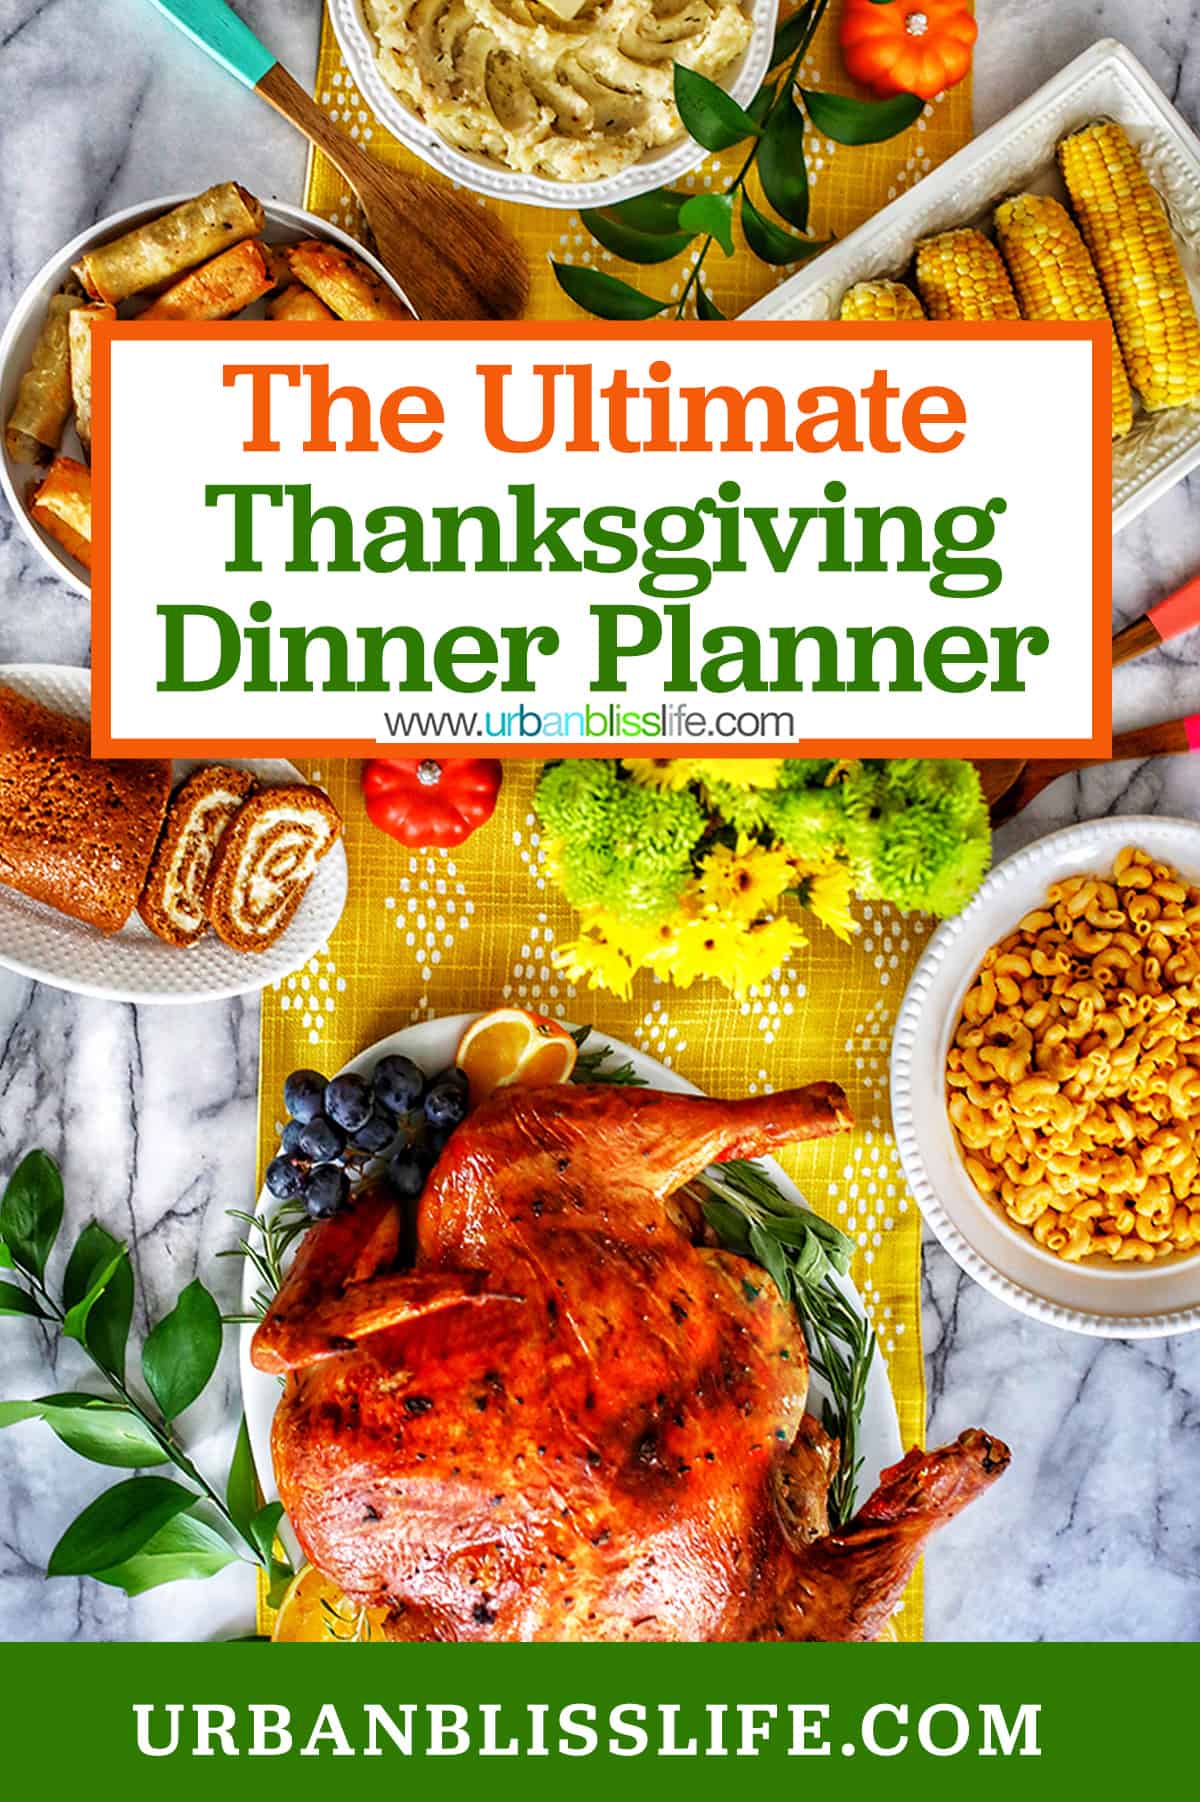 Thanksgiving dinner table with turkey and sides and title text that reads "The Ultimate Thanksgiving Dinner Planner."